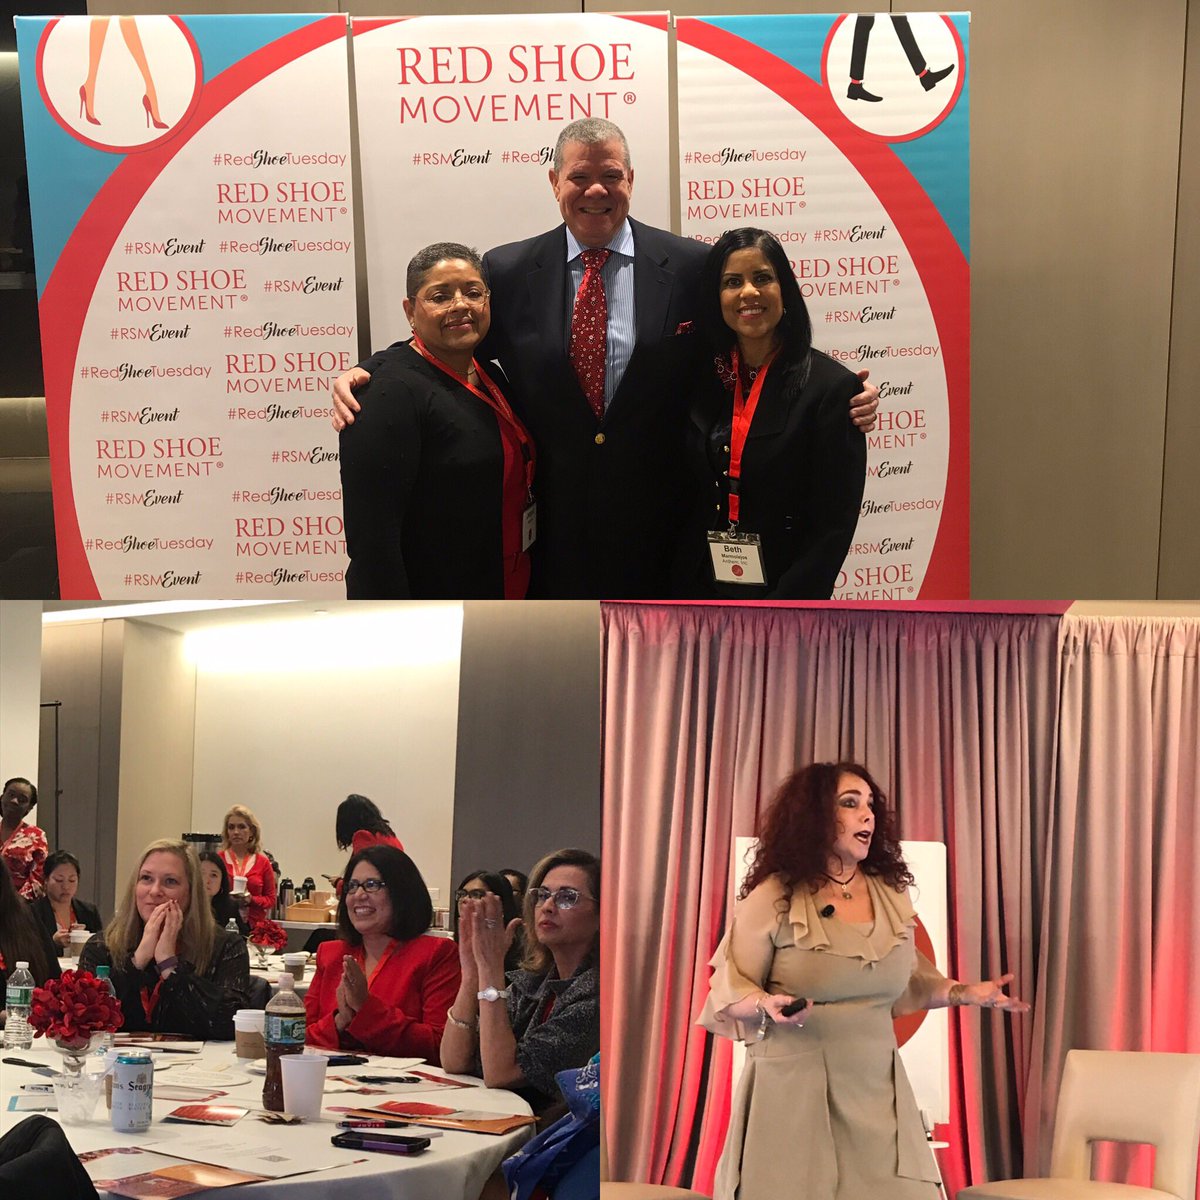 ## Tap into your Purpose and Passion with the #RSMevent ## 

Kicking things off at the Red Shoe Movement signature event at MetLife with former NY Prospanica Board members and Dr. Cindy Pace - AVP, Global Diverstiy & Inclusion.  Inspired and motivated!